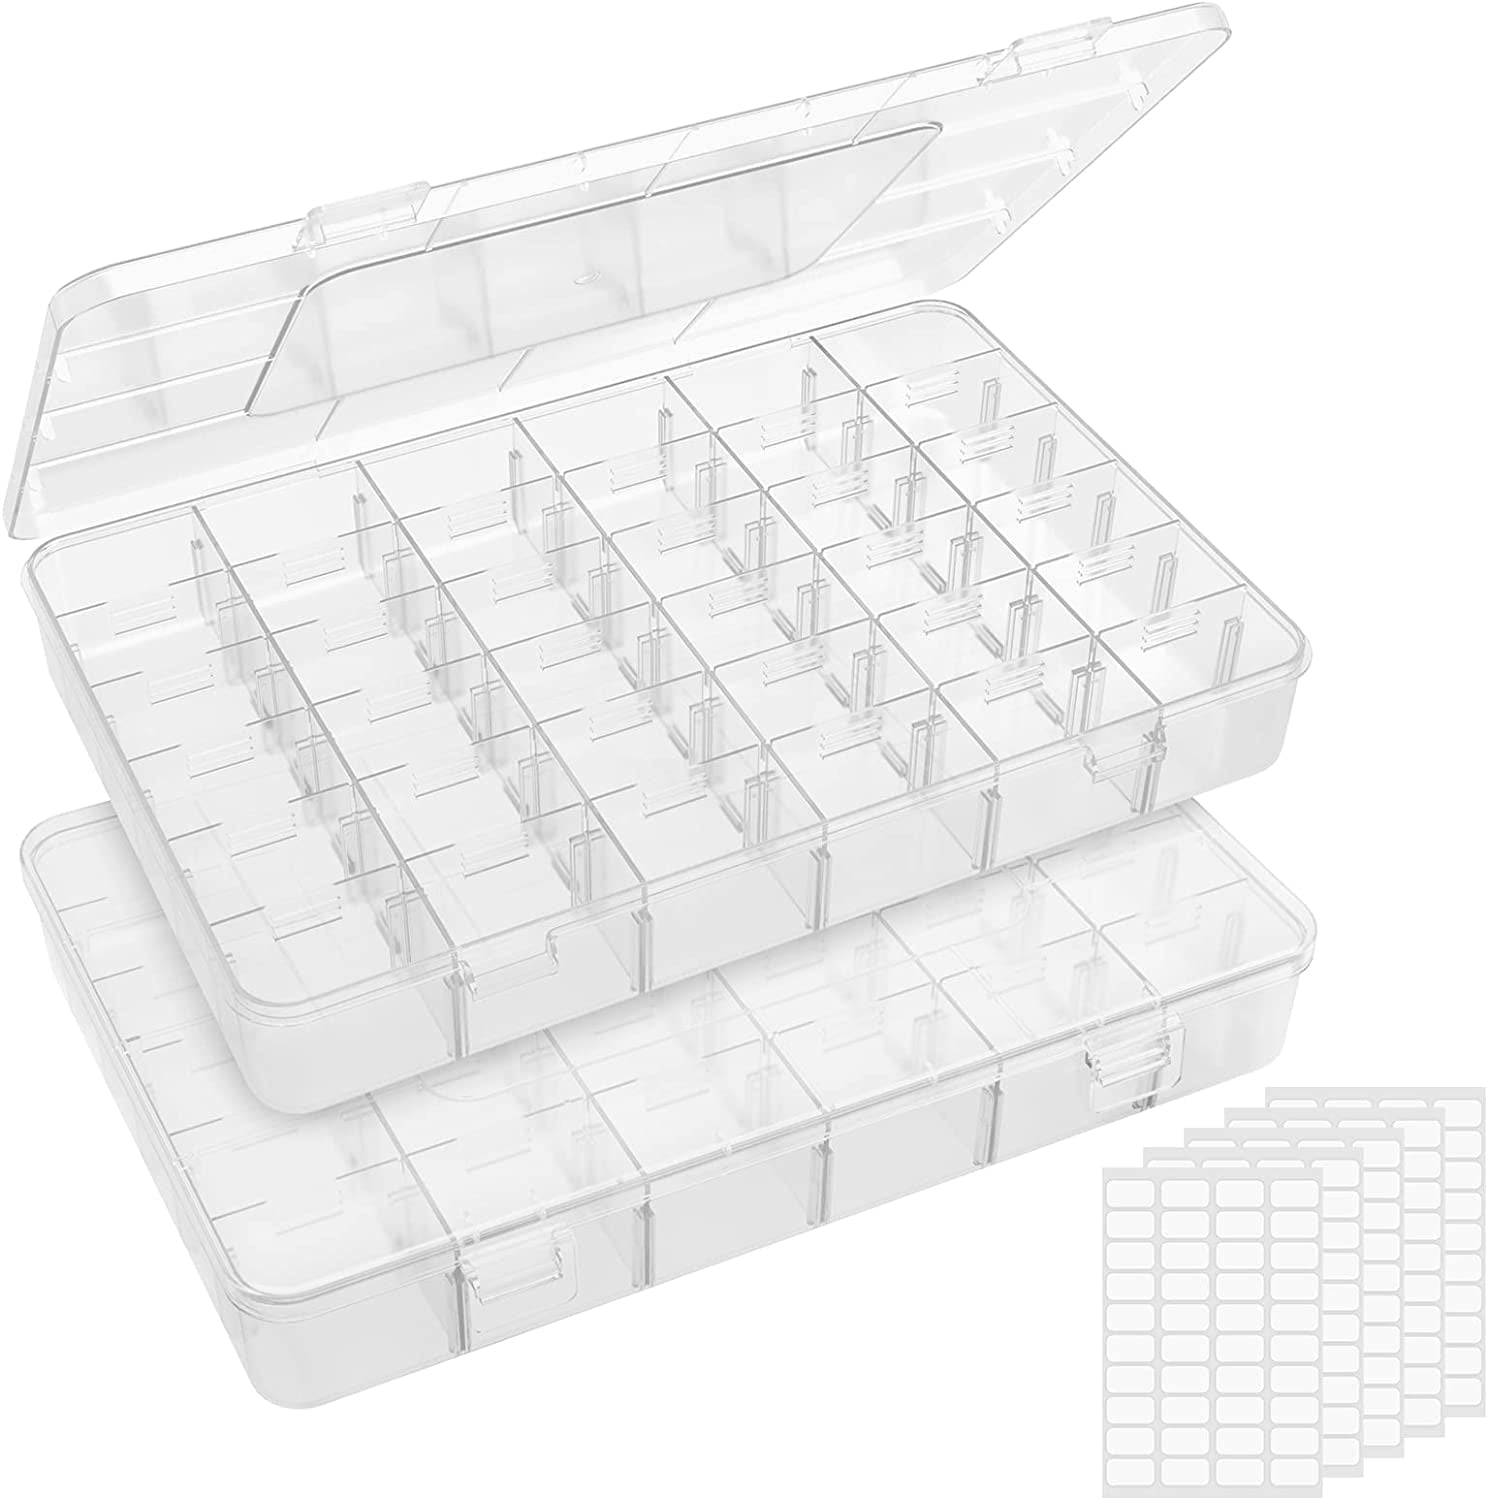 Cntb111 6 Storage Stackable Containers for Beads Crafts 2.75 Round Clear  Home for sale online